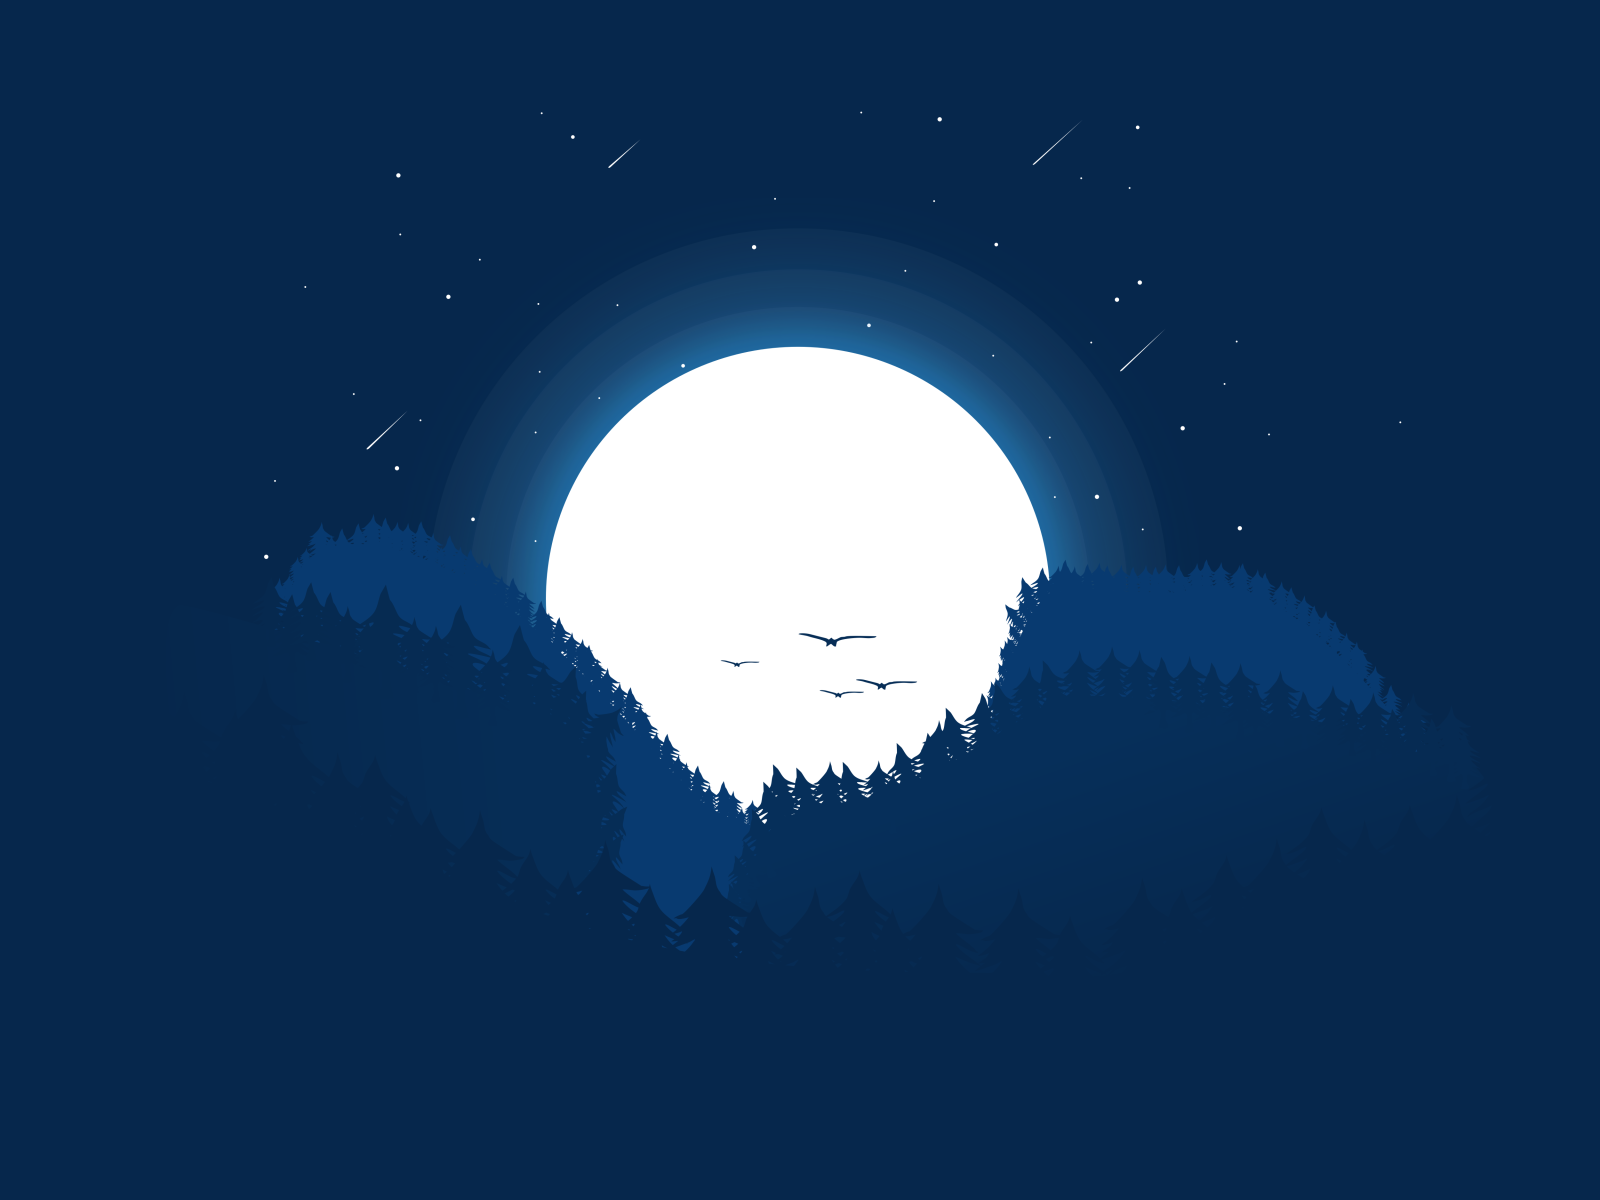 Landscape by Maman Designs on Dribbble